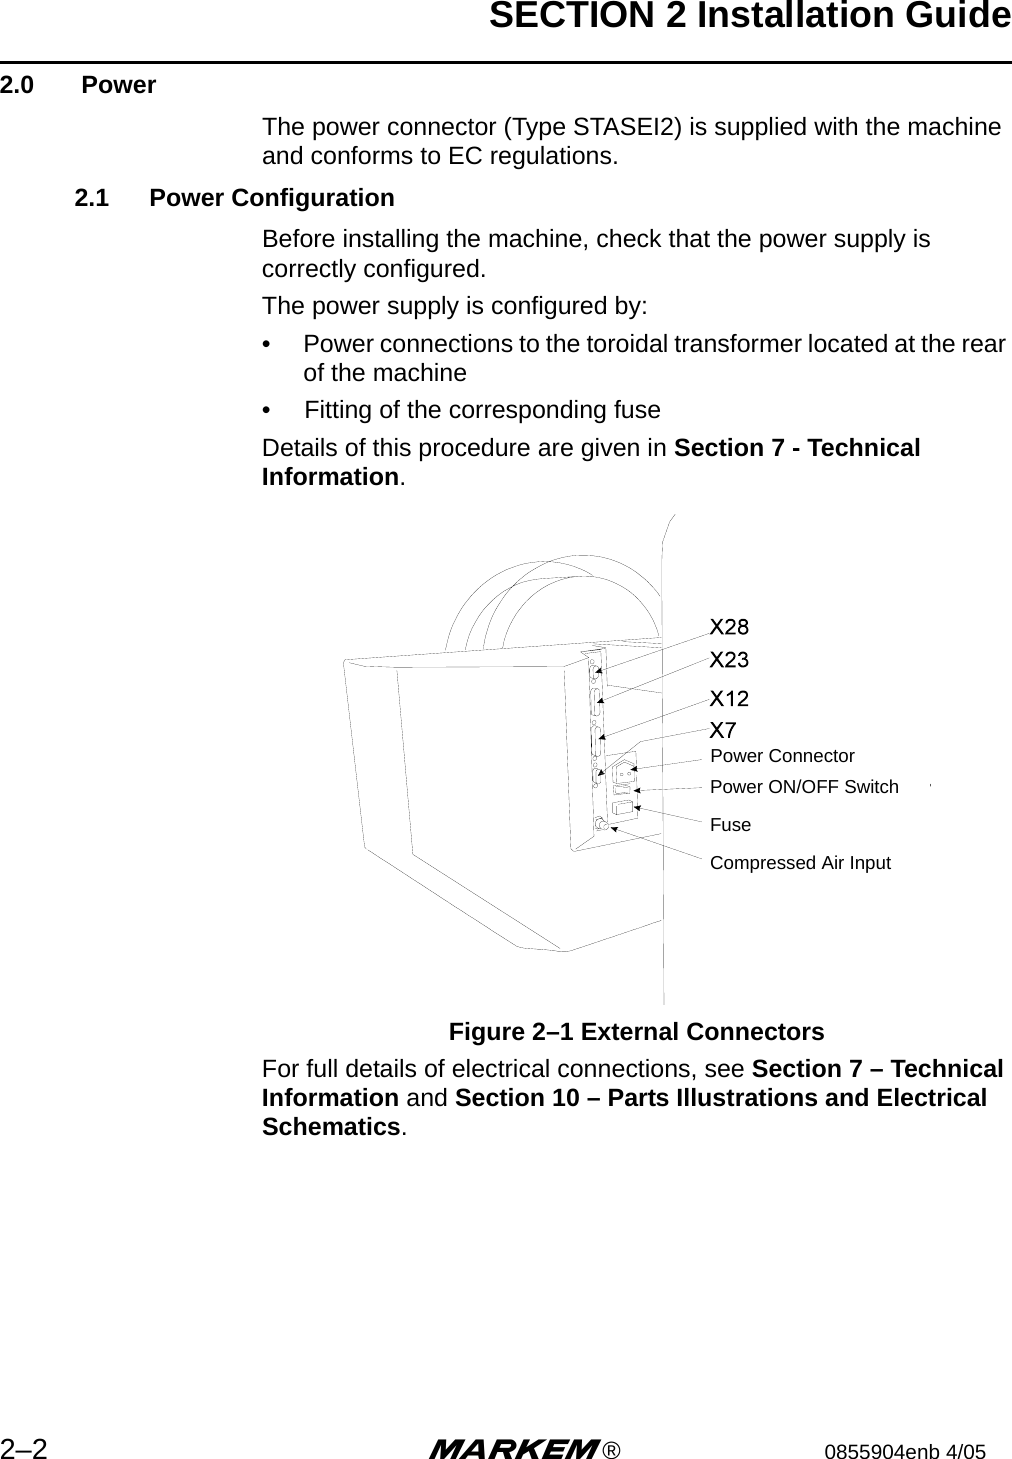 SECTION 2 Installation Guide2–2 m®0855904enb 4/052.0  PowerThe power connector (Type STASEI2) is supplied with the machine and conforms to EC regulations.2.1 Power ConfigurationBefore installing the machine, check that the power supply is correctly configured.The power supply is configured by:•  Power connections to the toroidal transformer located at the rear of the machine•  Fitting of the corresponding fuseDetails of this procedure are given in Section 7 - Technical Information.Figure 2–1 External ConnectorsFor full details of electrical connections, see Section 7 – Technical Information and Section 10 – Parts Illustrations and Electrical Schematics.Power ConnectorPower ON/OFF SwitchFuseCompressed Air Input